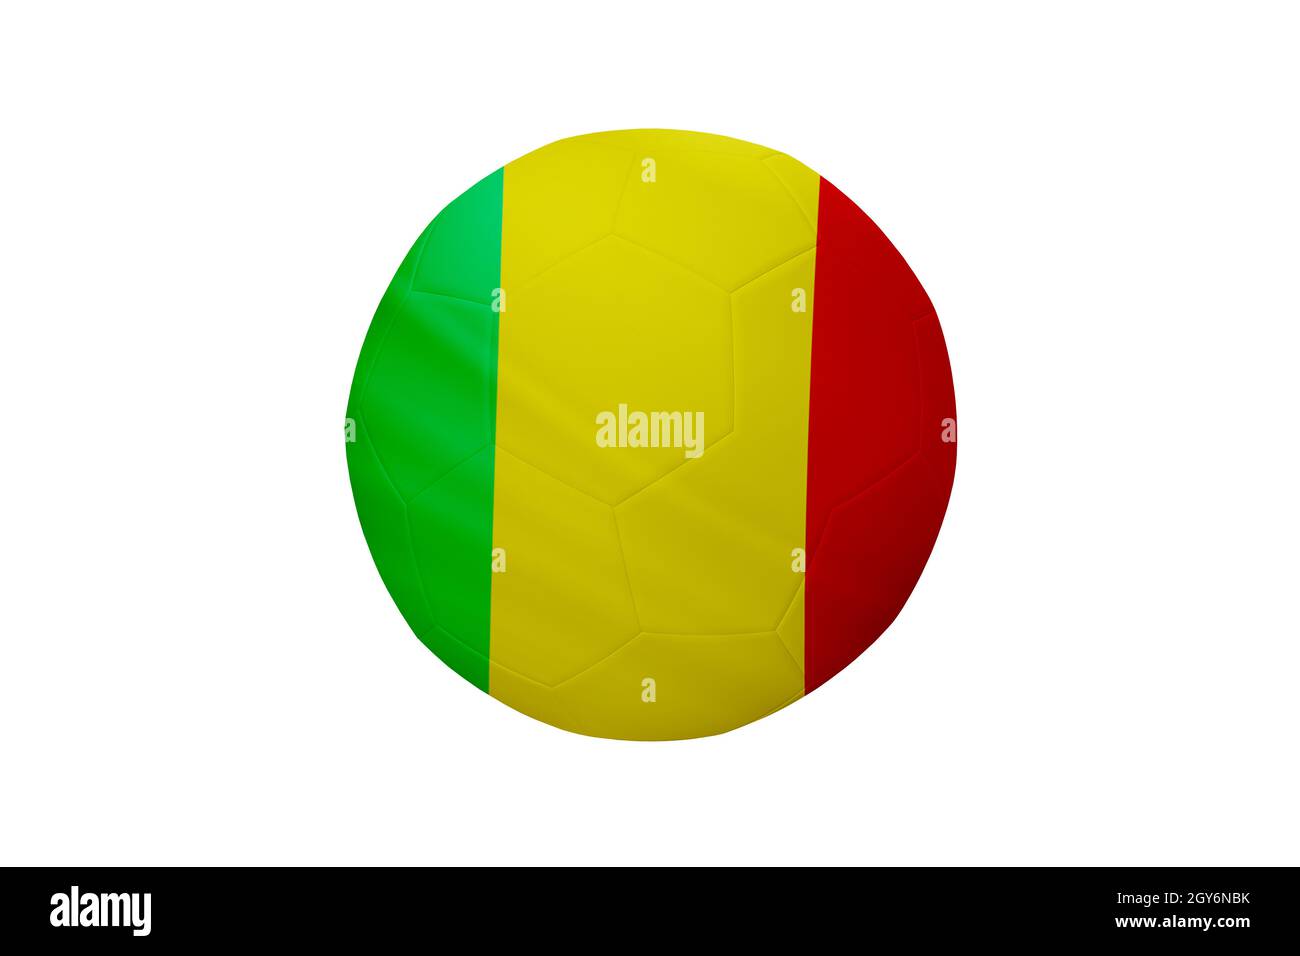 Football in the colors of the Mali flag isolated on white background. In a conceptual championship image supporting Mali. Stock Photo